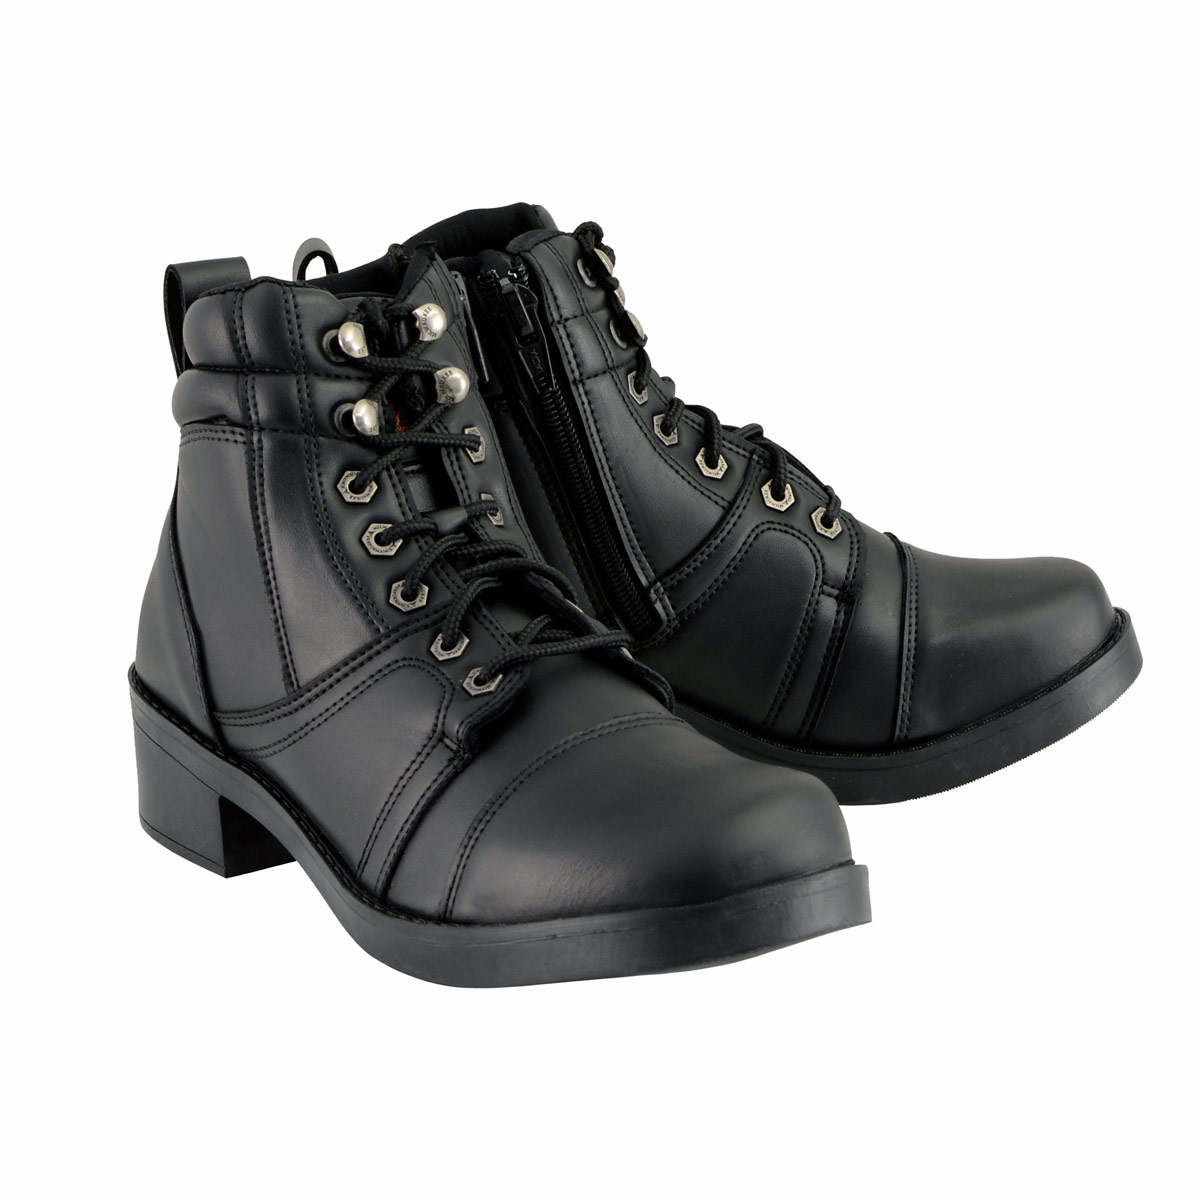 Milwaukee Leather MBK9255 Boys Black Lace-Up Boots with Side Zipper Entry 6 - image 1 of 9